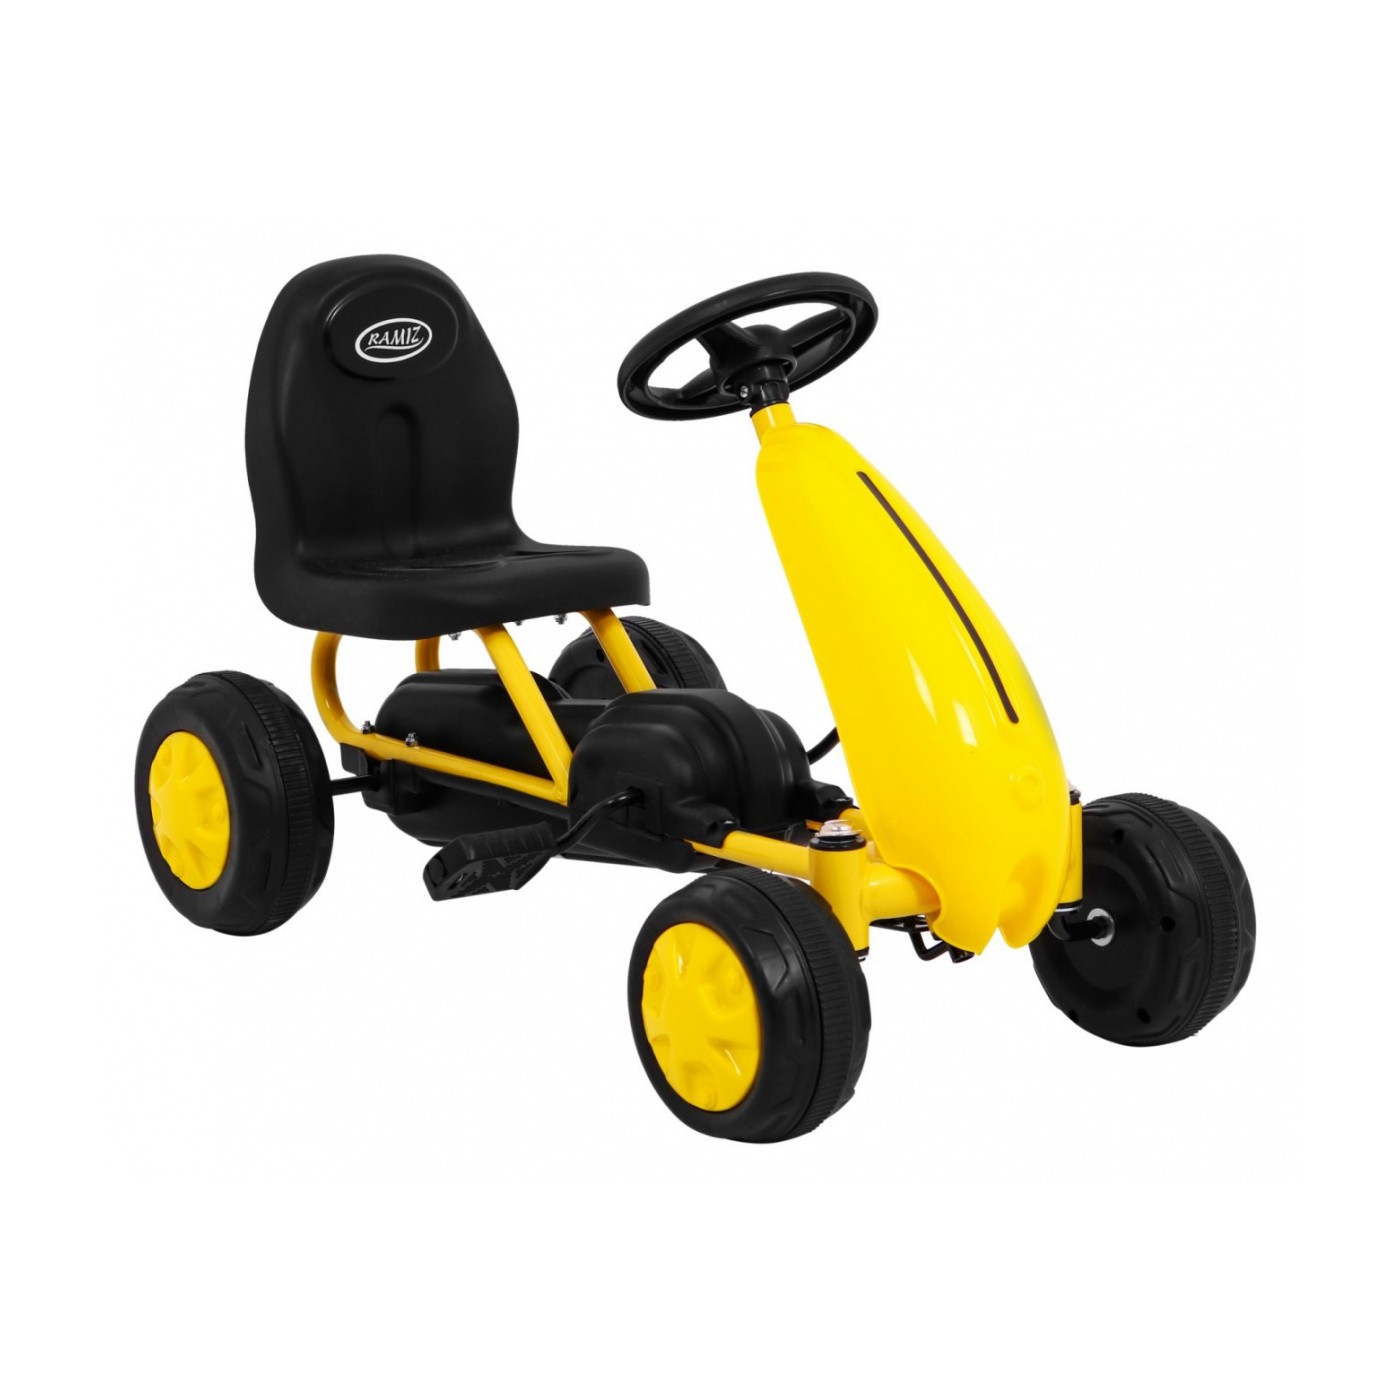 Go-kartfor The Youngest Yellow